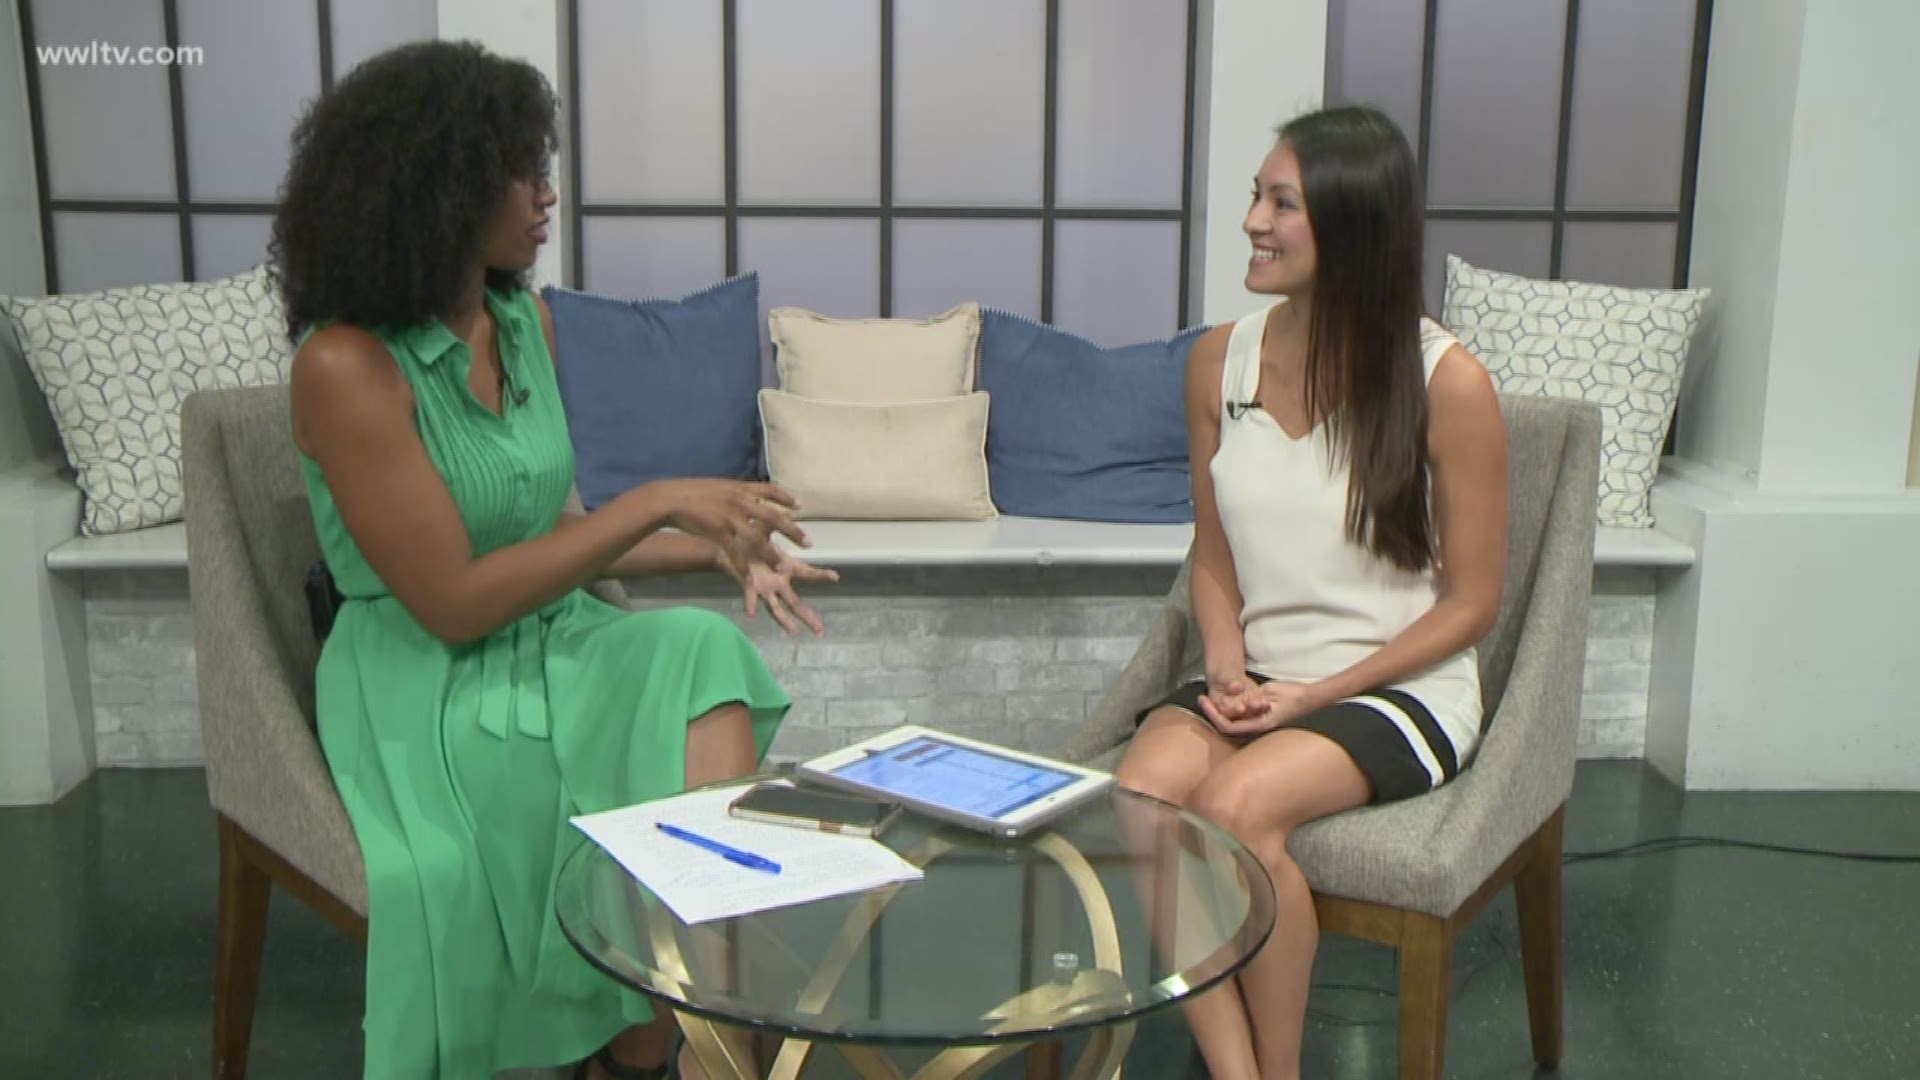 Physical Therapist Sara Reardon talks about the sensitive subject of pelvic health in women and how it can be treated.